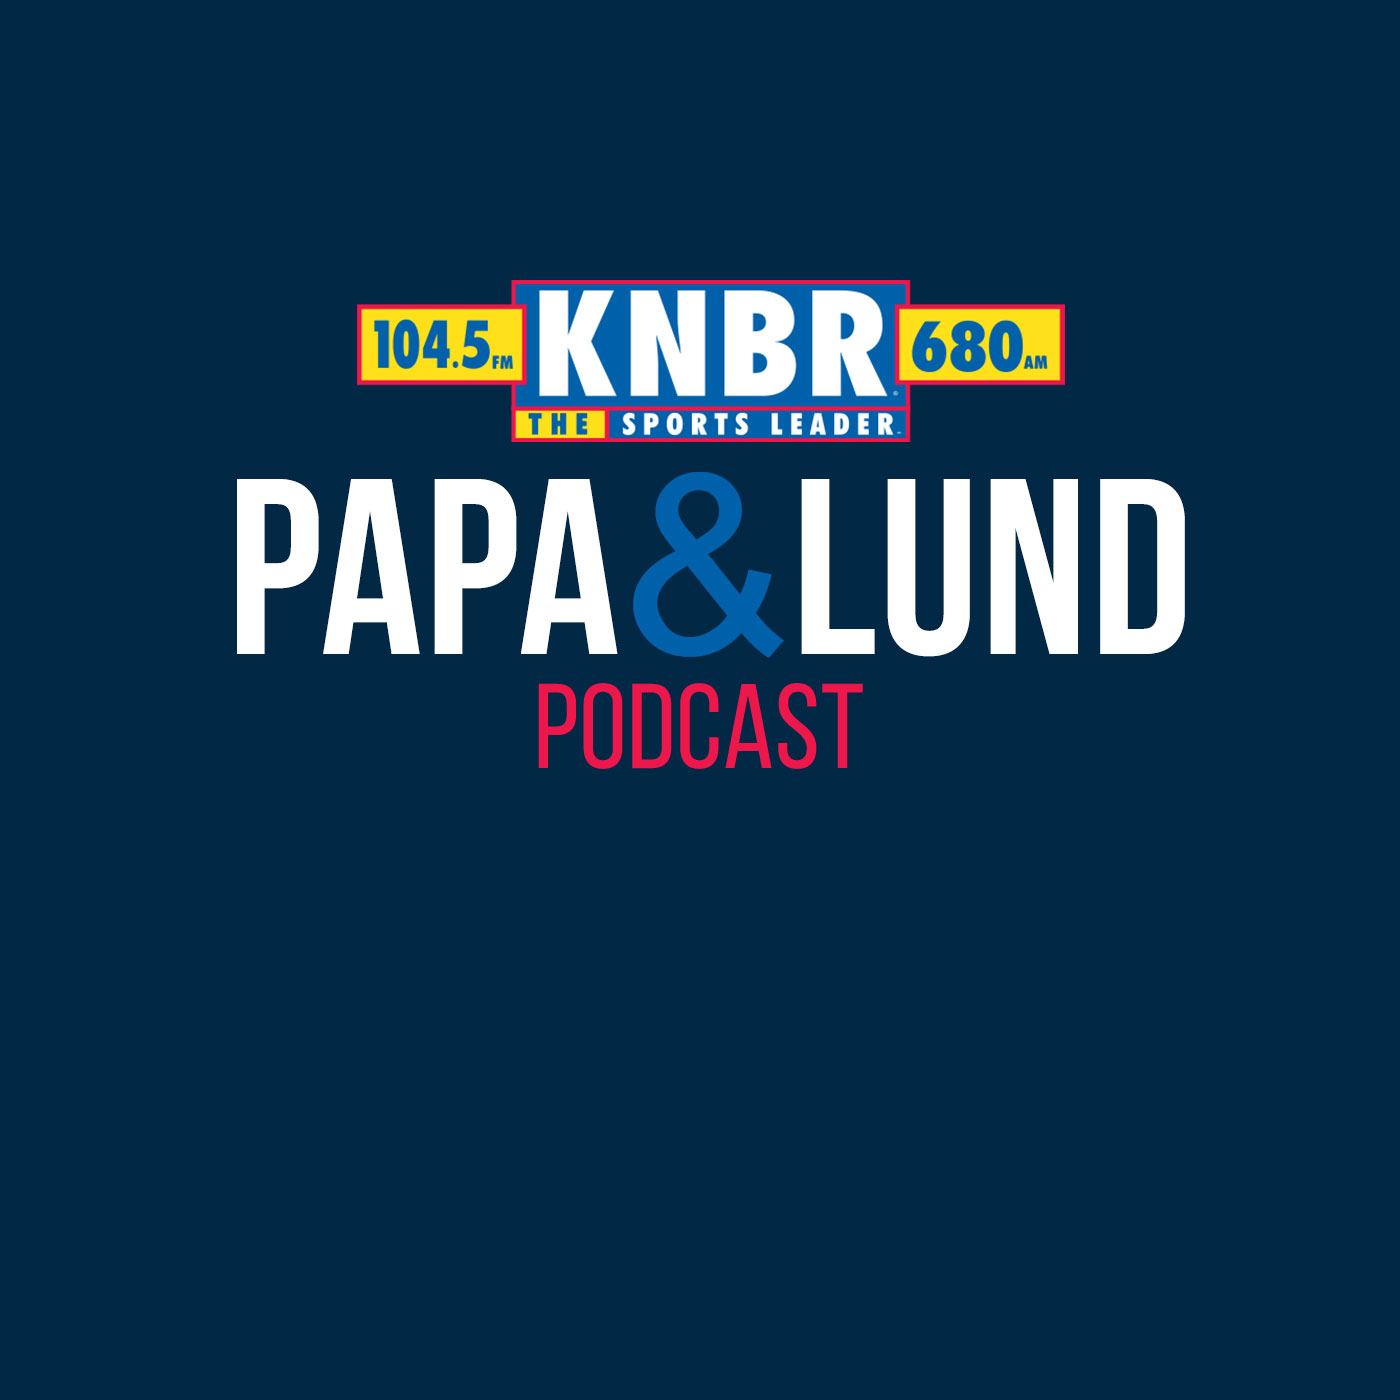 10-28 Matt Maiocco joins Papa & Lund to discuss the latest 49ers injuries, and how the 49ers could look to implement Christian McCaffrey into this weeks gameplan against the Rams